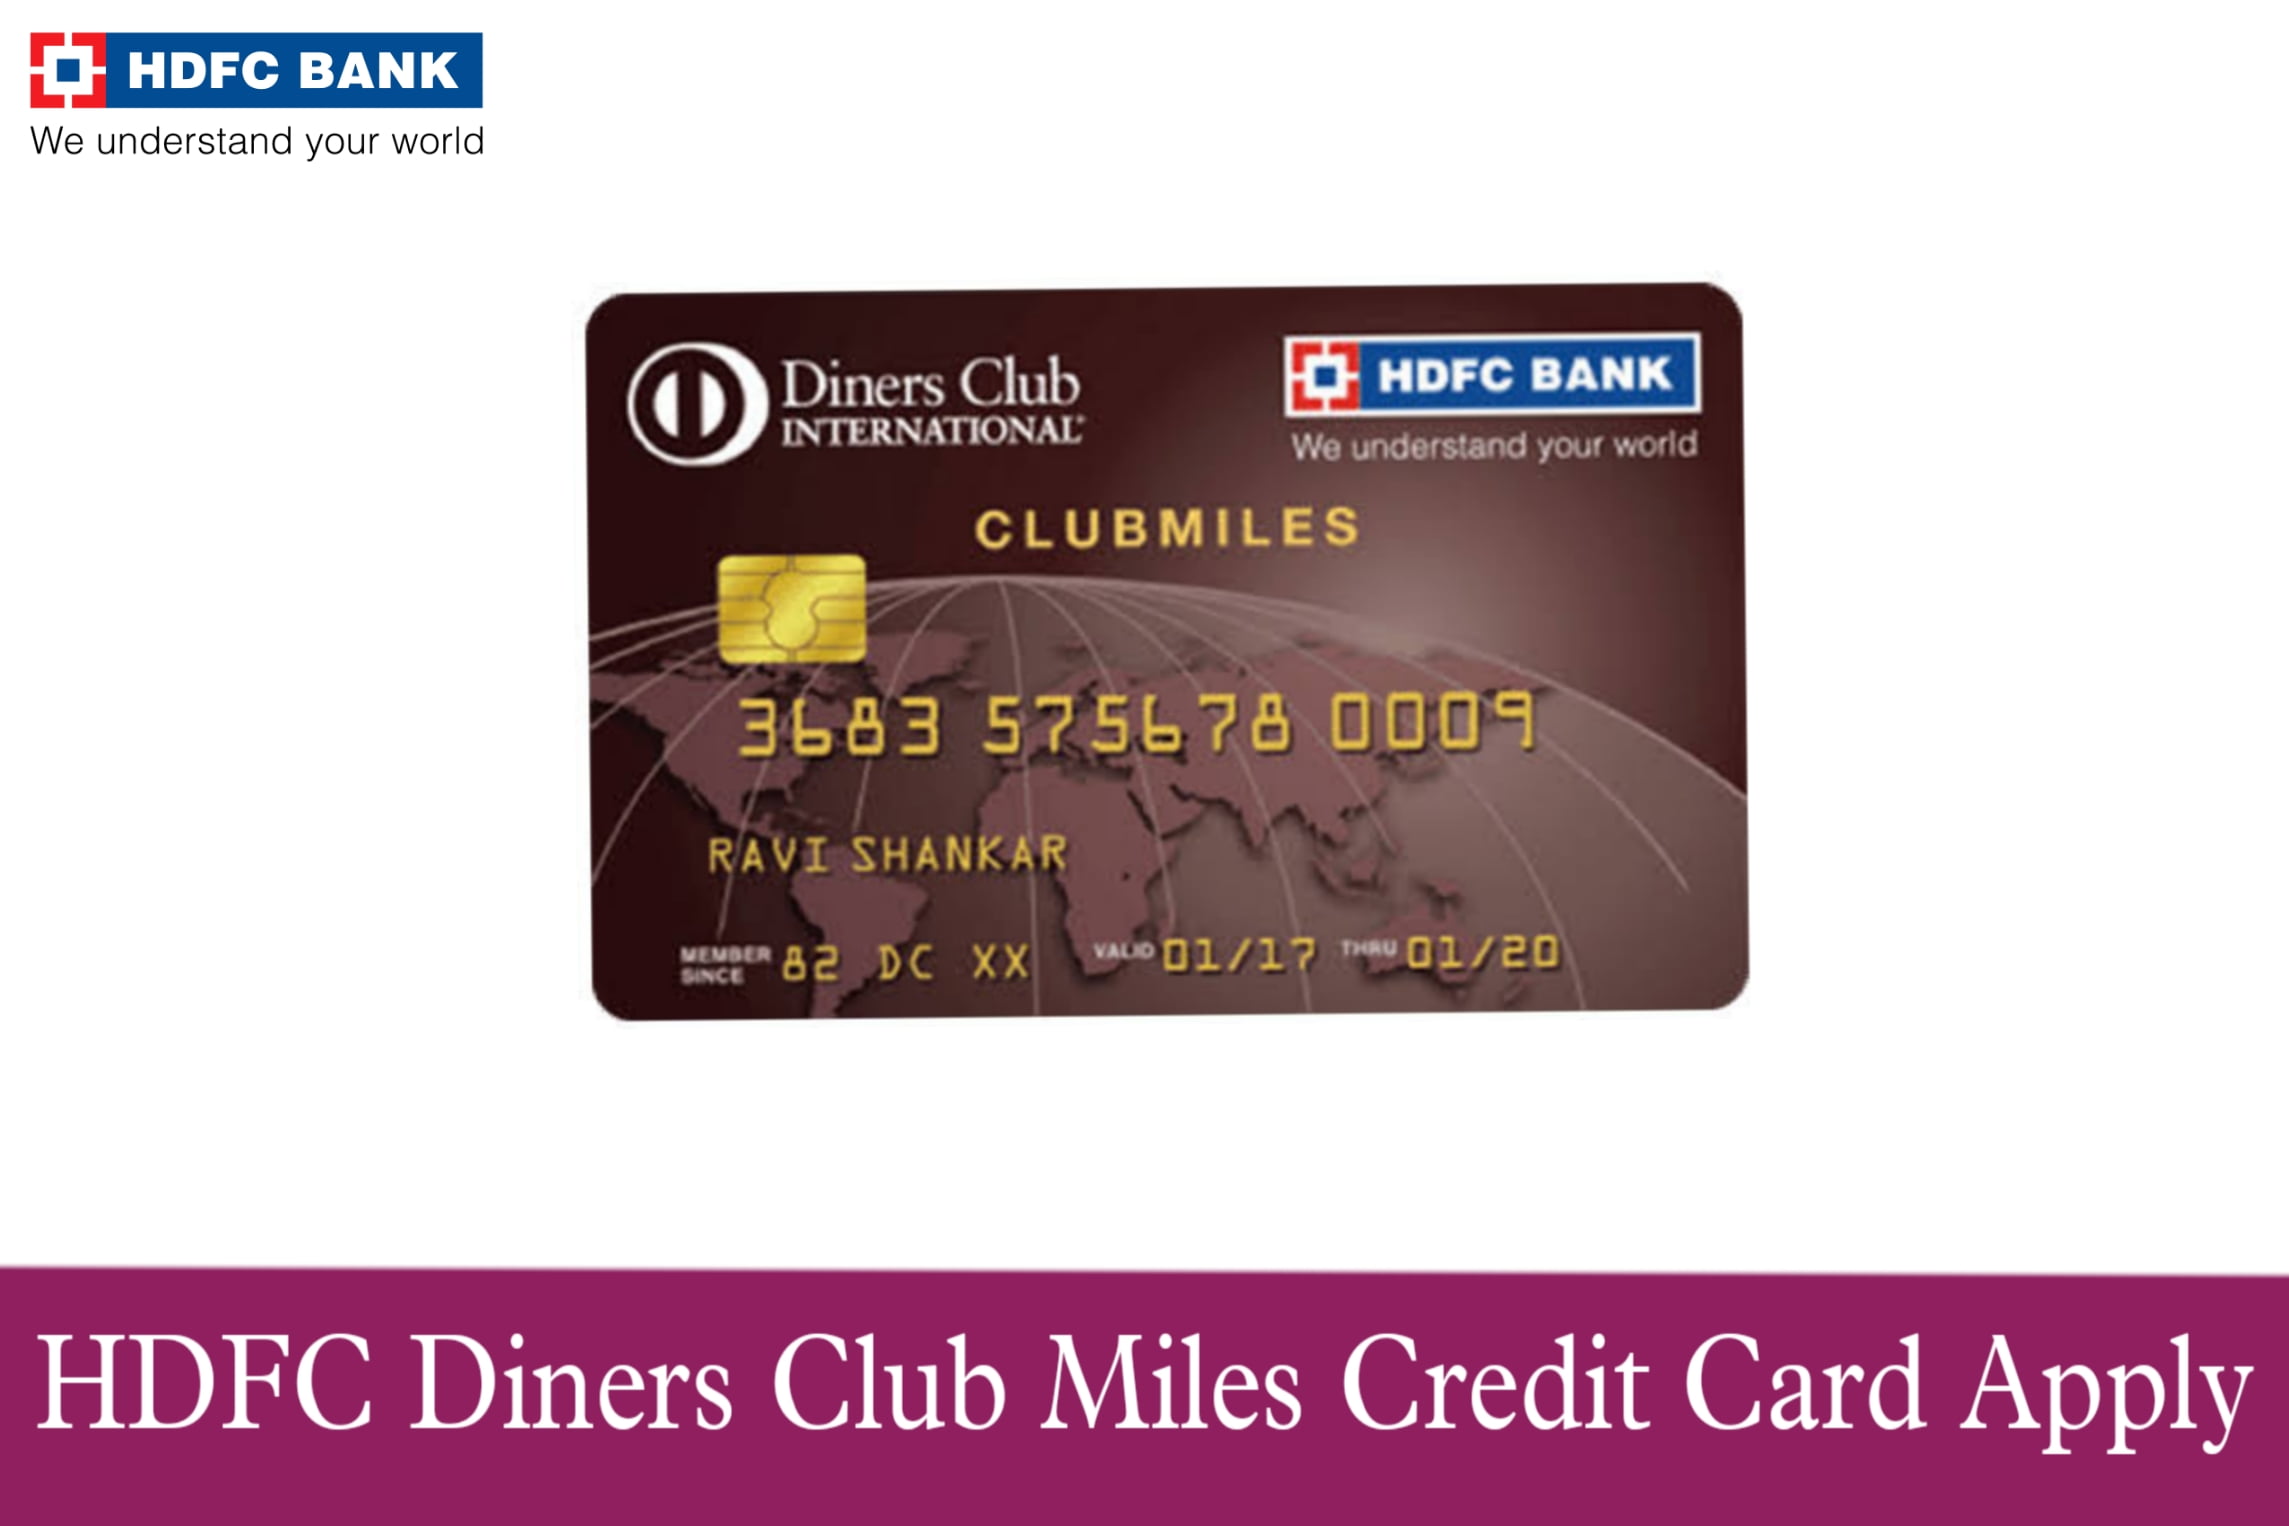 HDFC Diners Club Miles Credit Card